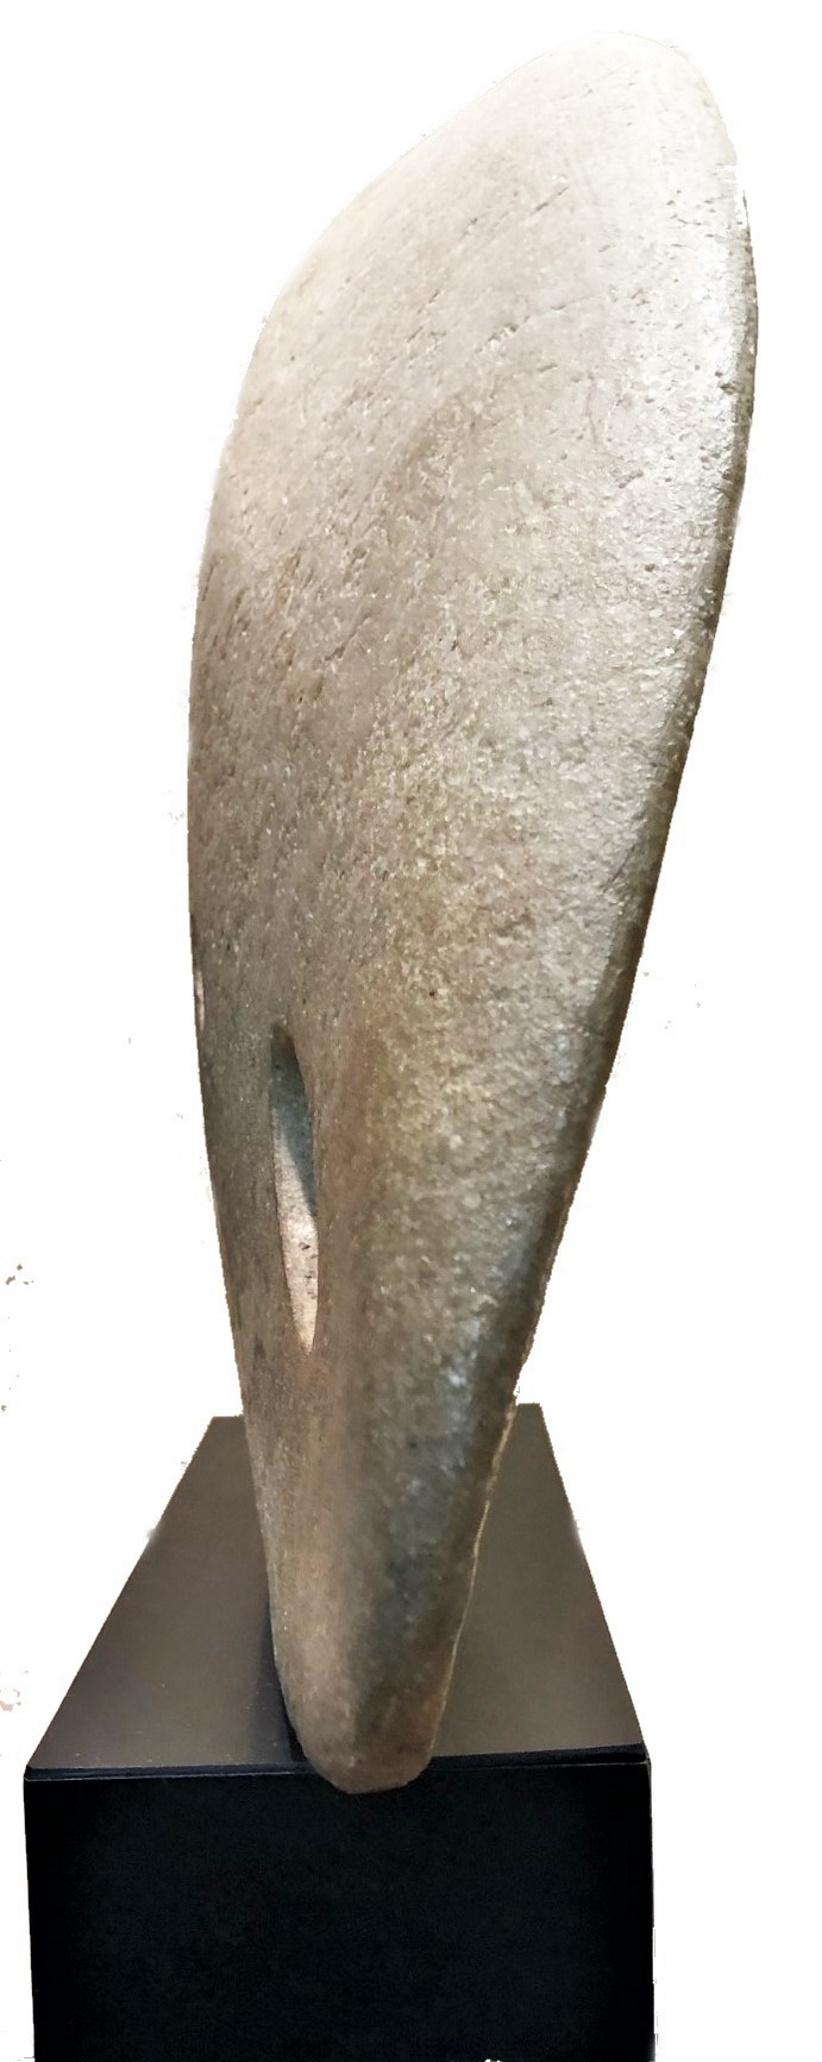 Rhys Caparn, Extraterrestial, American Mid-Century Cast Stone Sculpture, 1969 For Sale 1